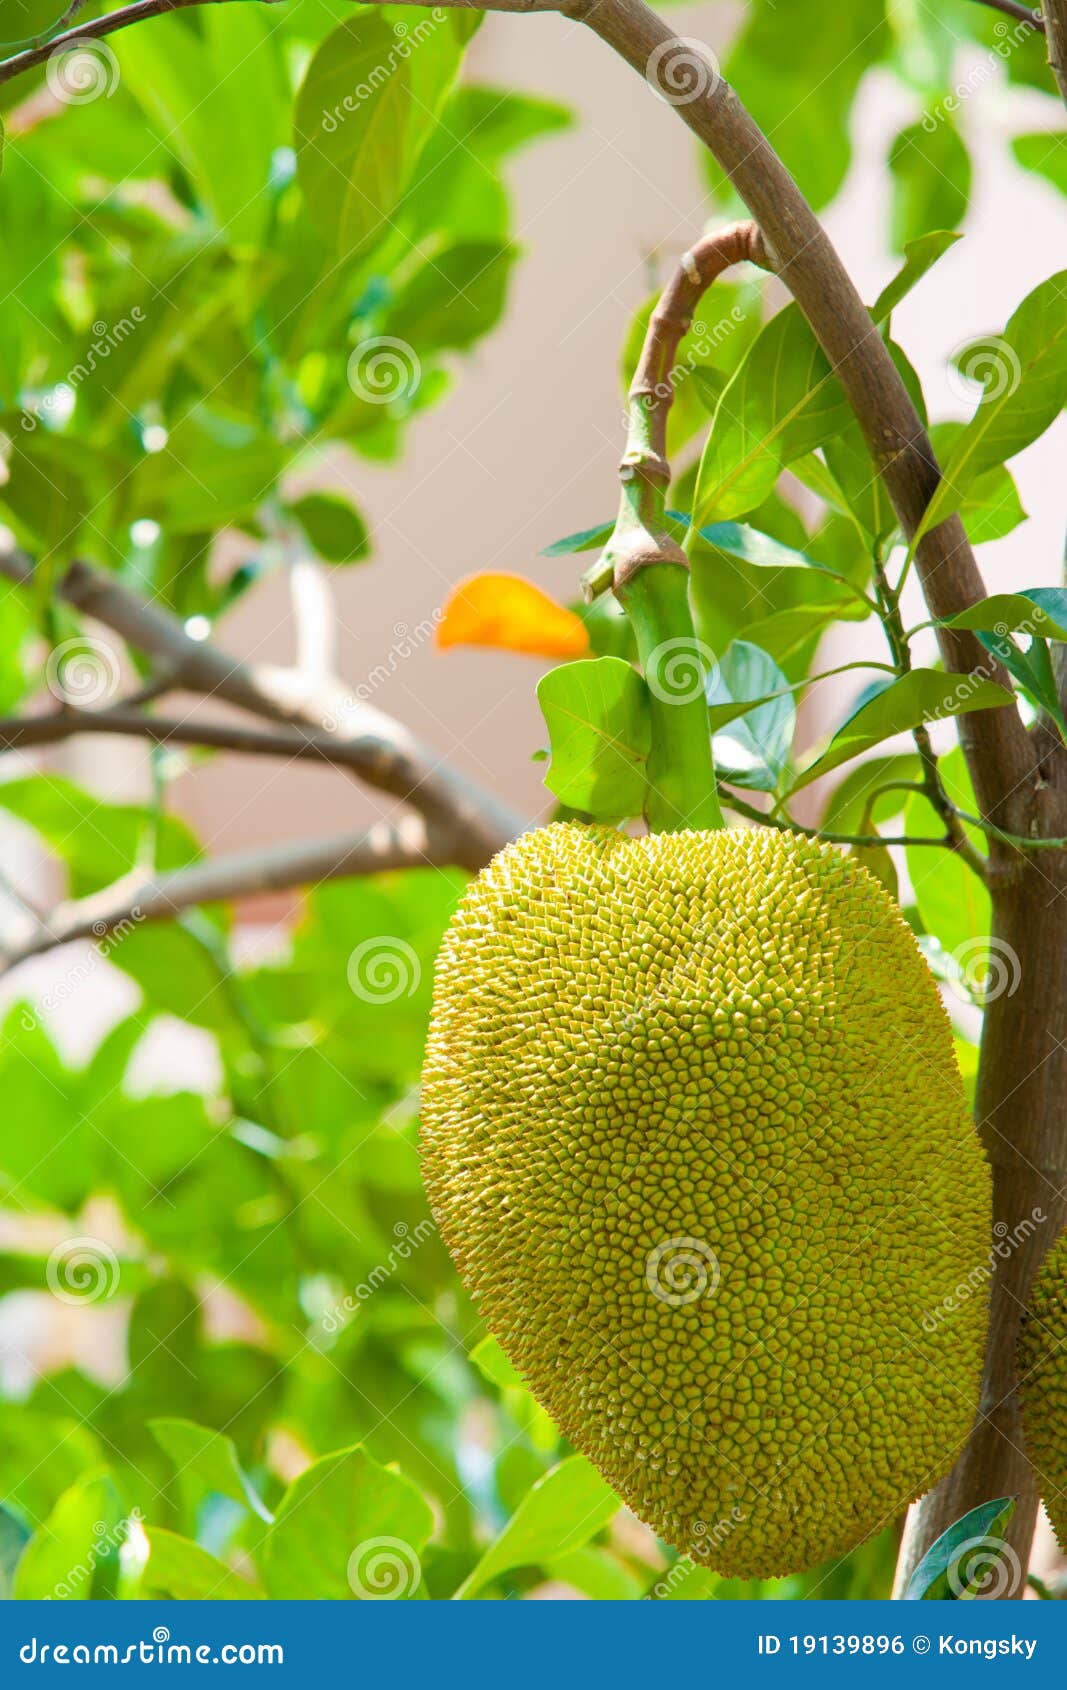 A young jackfruit on tree